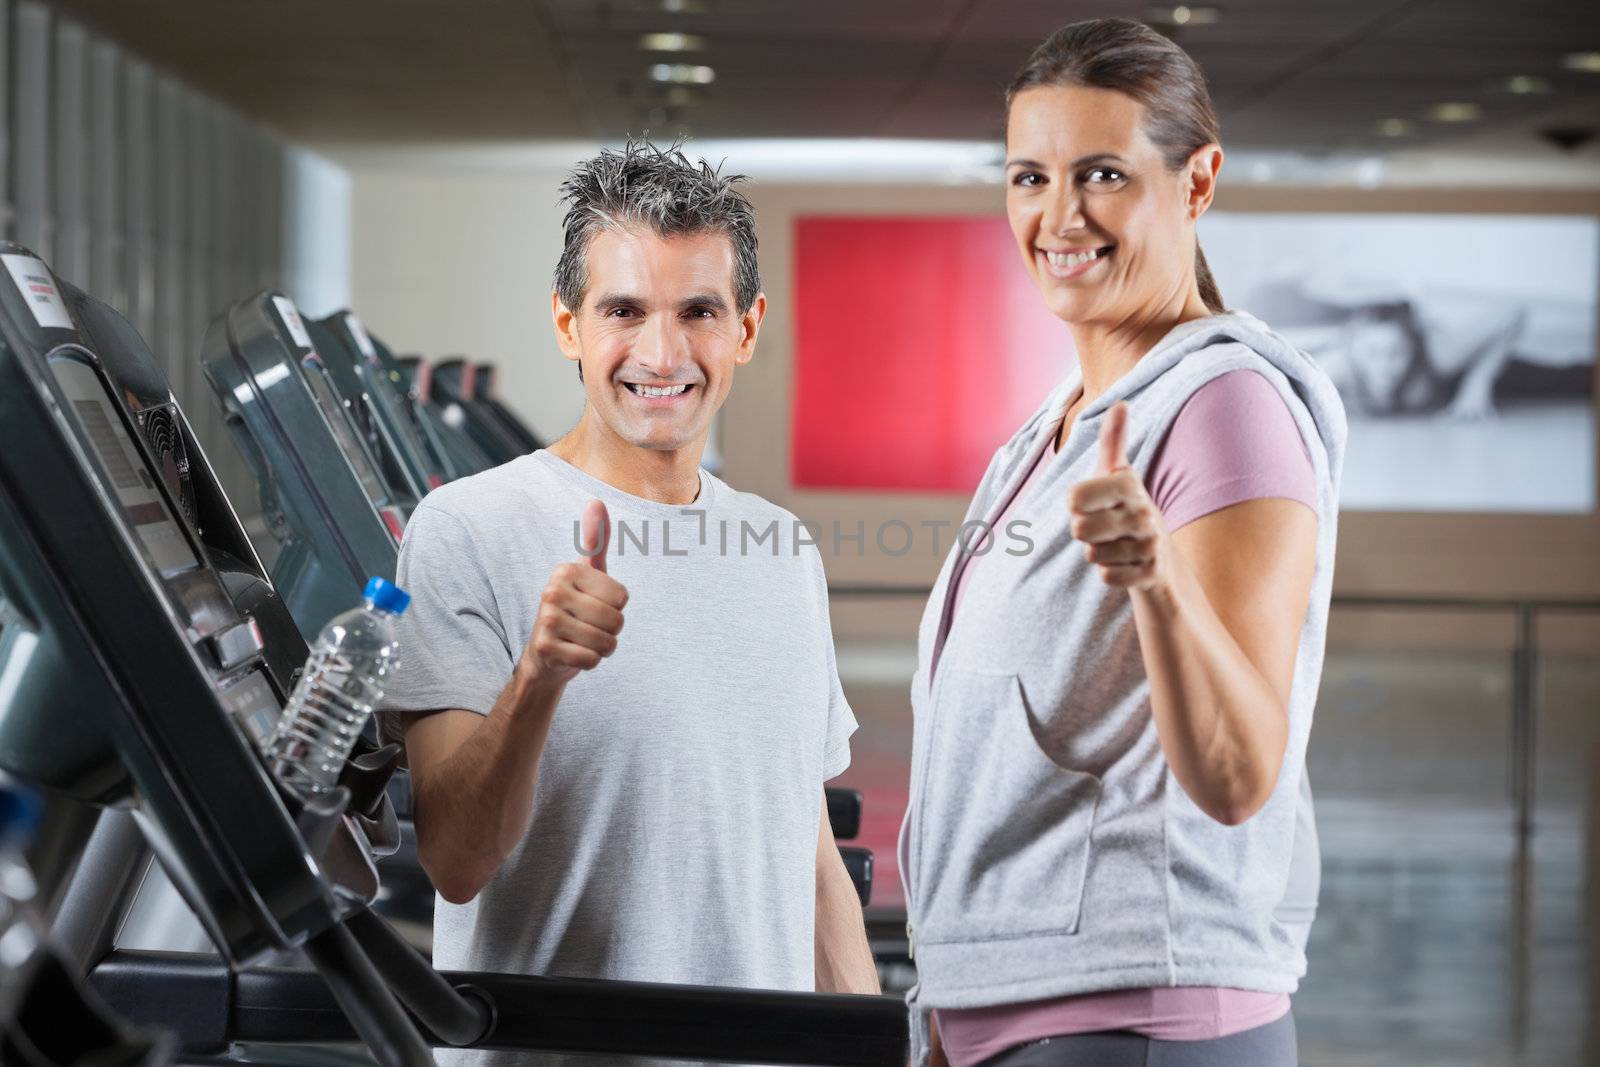 Instructor And Client Showing Thumbs Up Sign In Health Club by leaf